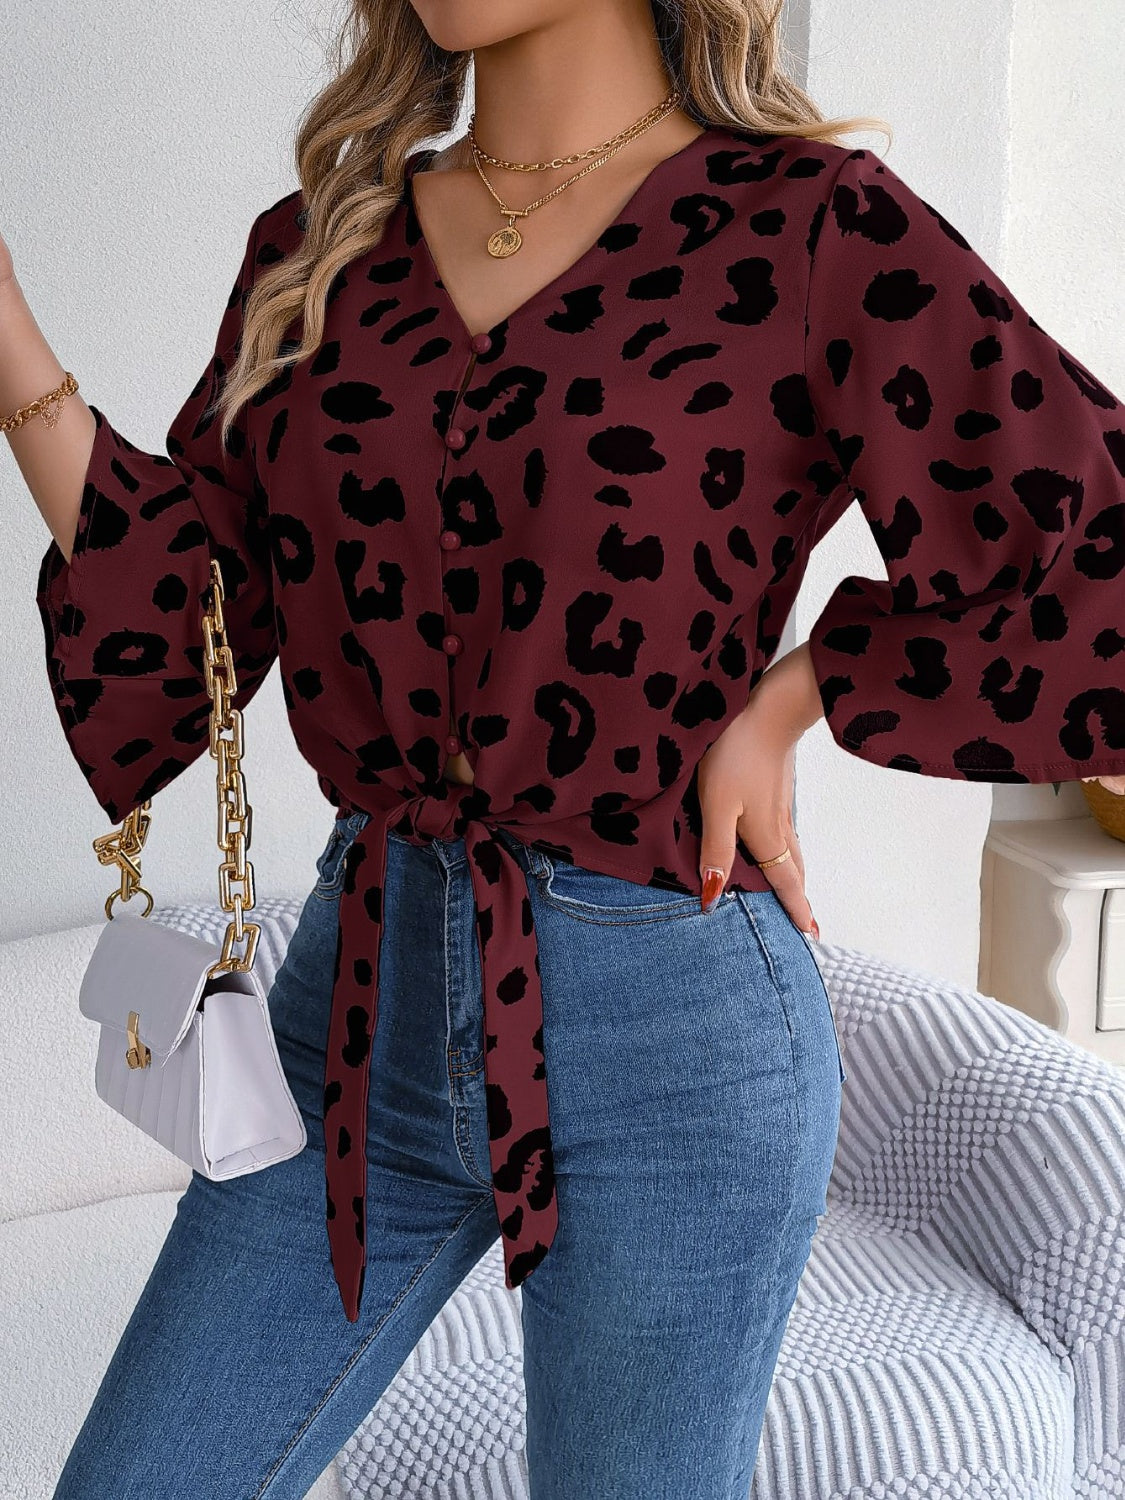 Animal Print Long Sleeve Shirt Women's Casual Tied Button Up Leopard V-Neck Blouse